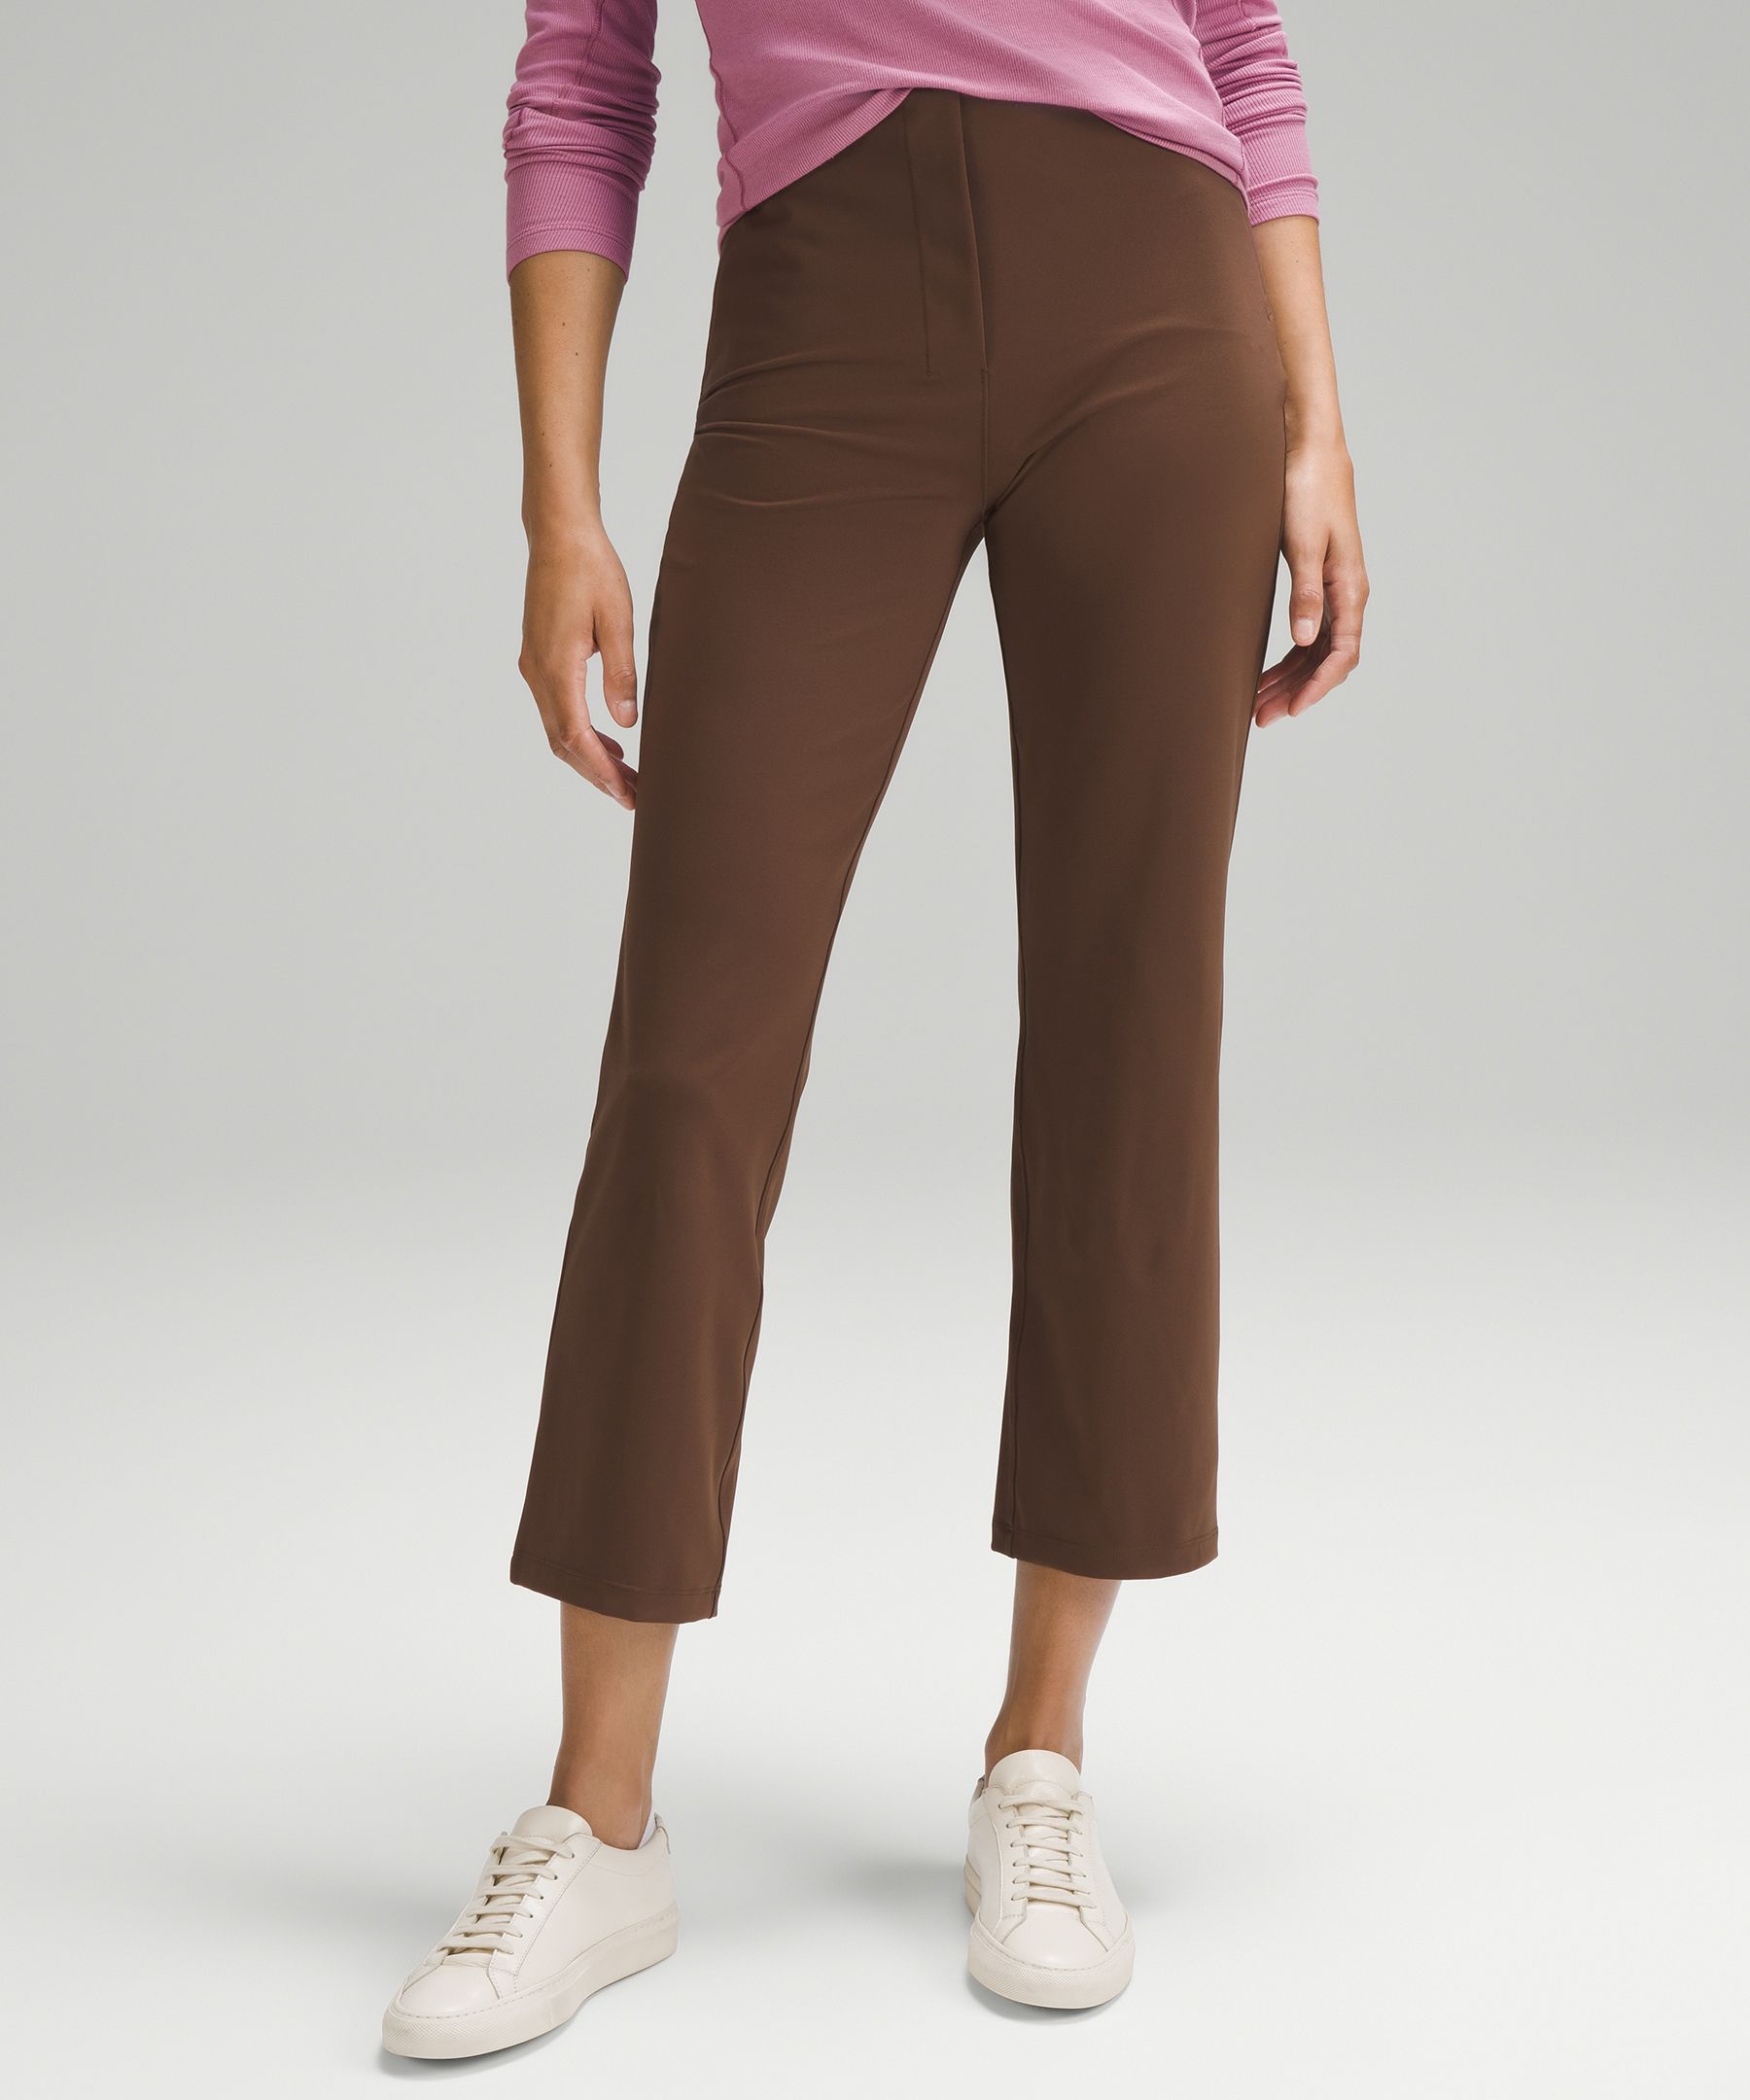 Lululemon Smooth-Fit Pull-On High Rise Pant - Retail $118